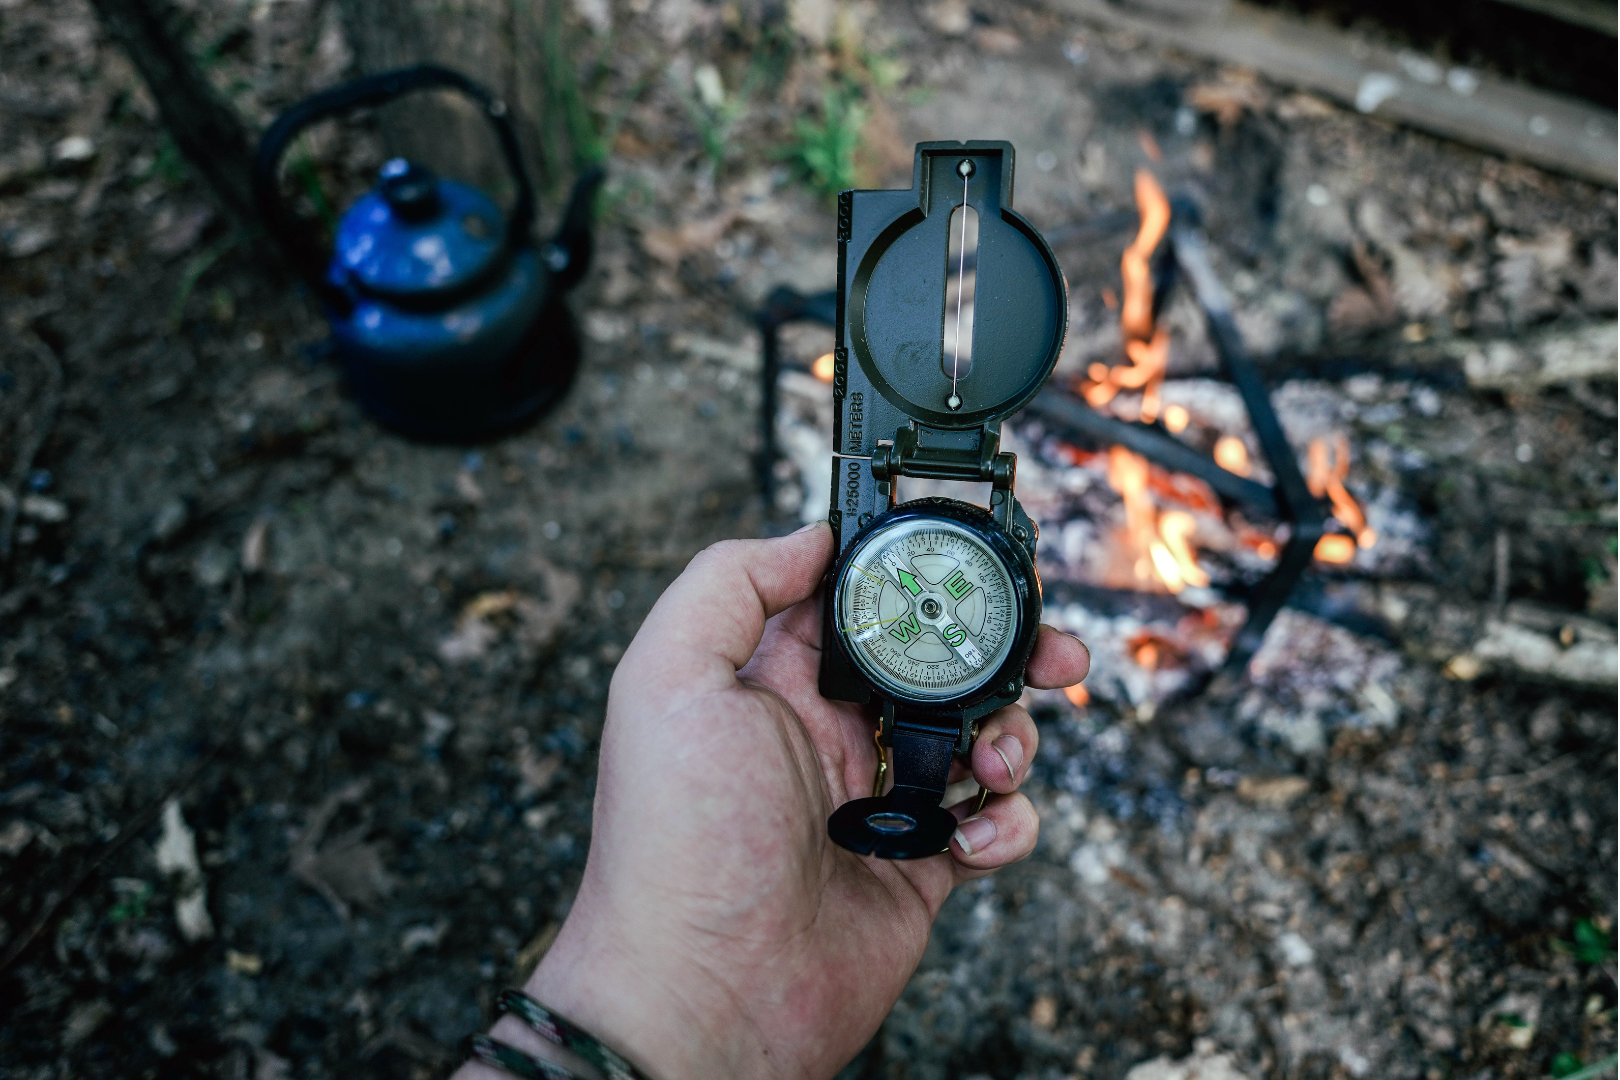 compass for bushcraft camping and exploring